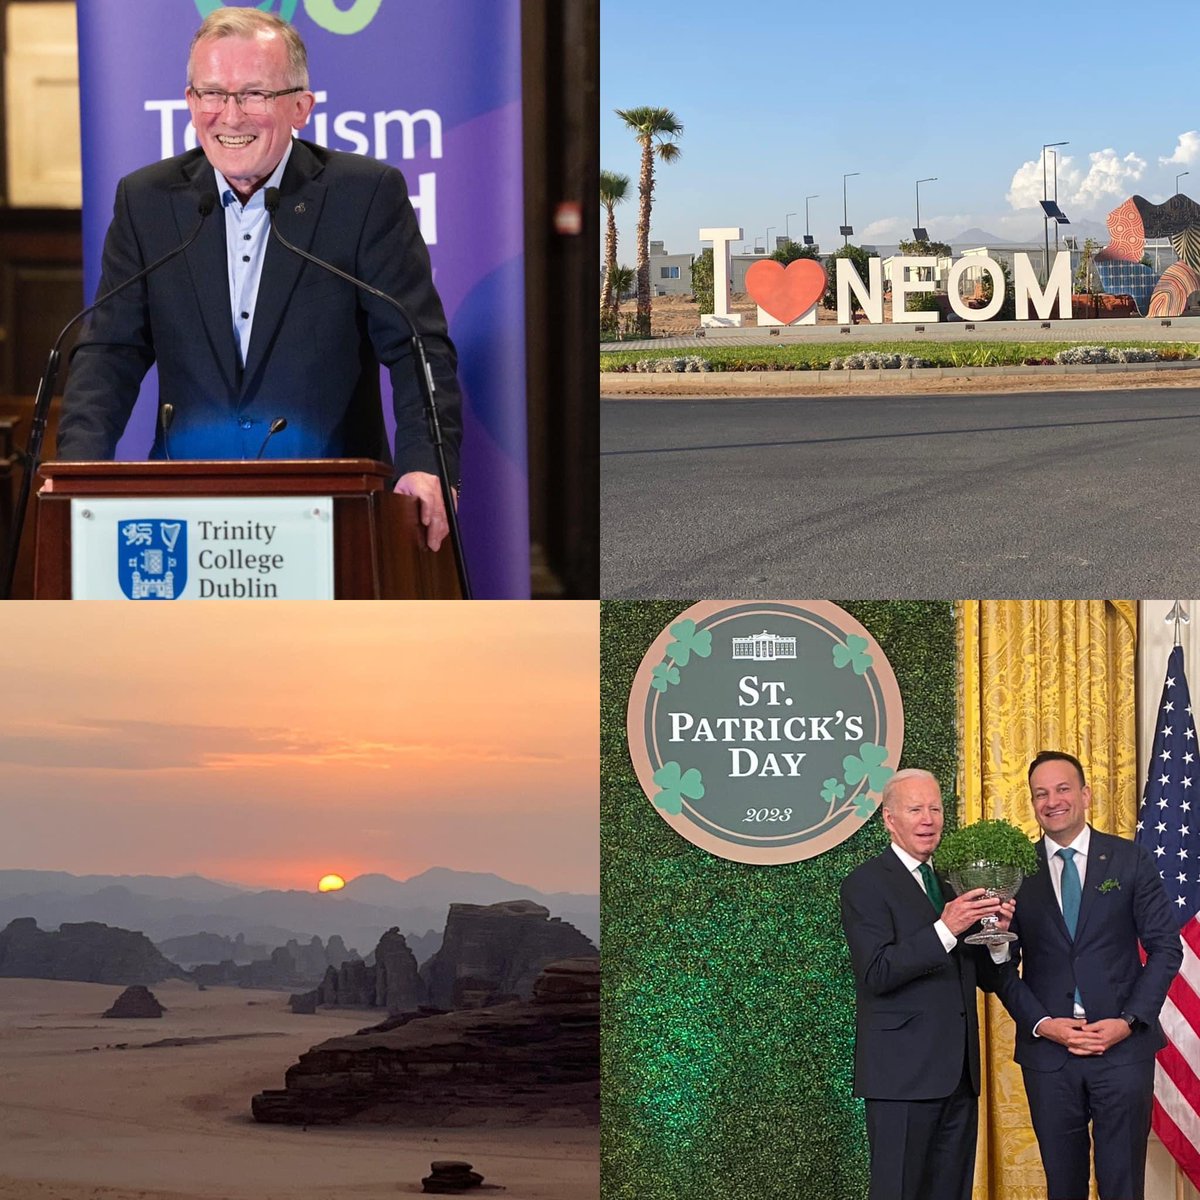 2023 certainly rang in the changes.Said farewell to Tourism Ireland after 21 years with some special farewell moments including visiting the White House as a guest of President Biden.Thanks to all my new friends who have made me so welcome in NEOM.Roll on a great 2024. HNY all.